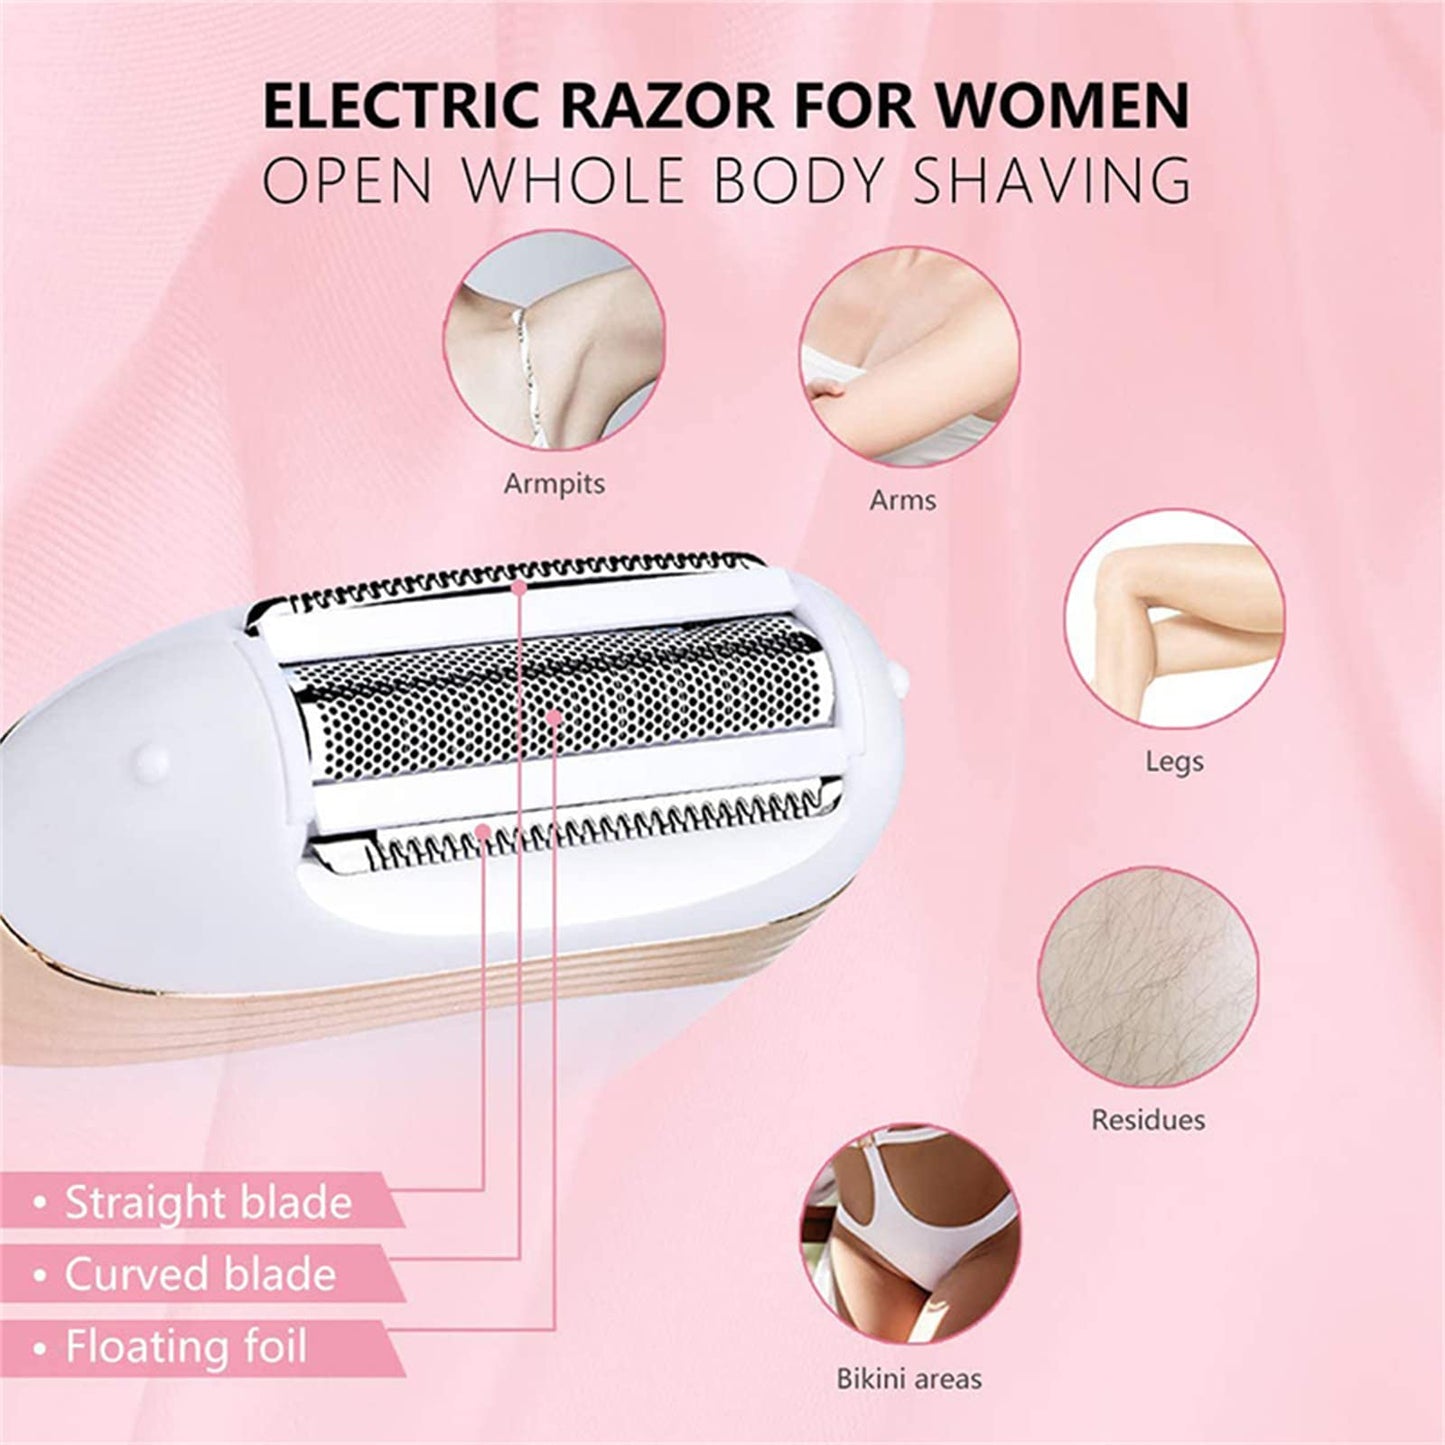 Arabest Electric Hair Removal Epilator, Portable Waterproof Painless Electric Hair Shaver, USB Rechargeable Lady Cordless Depilator, Bikini Trimmer Wet and Dry Use for Arm Bikini Leg Underarm